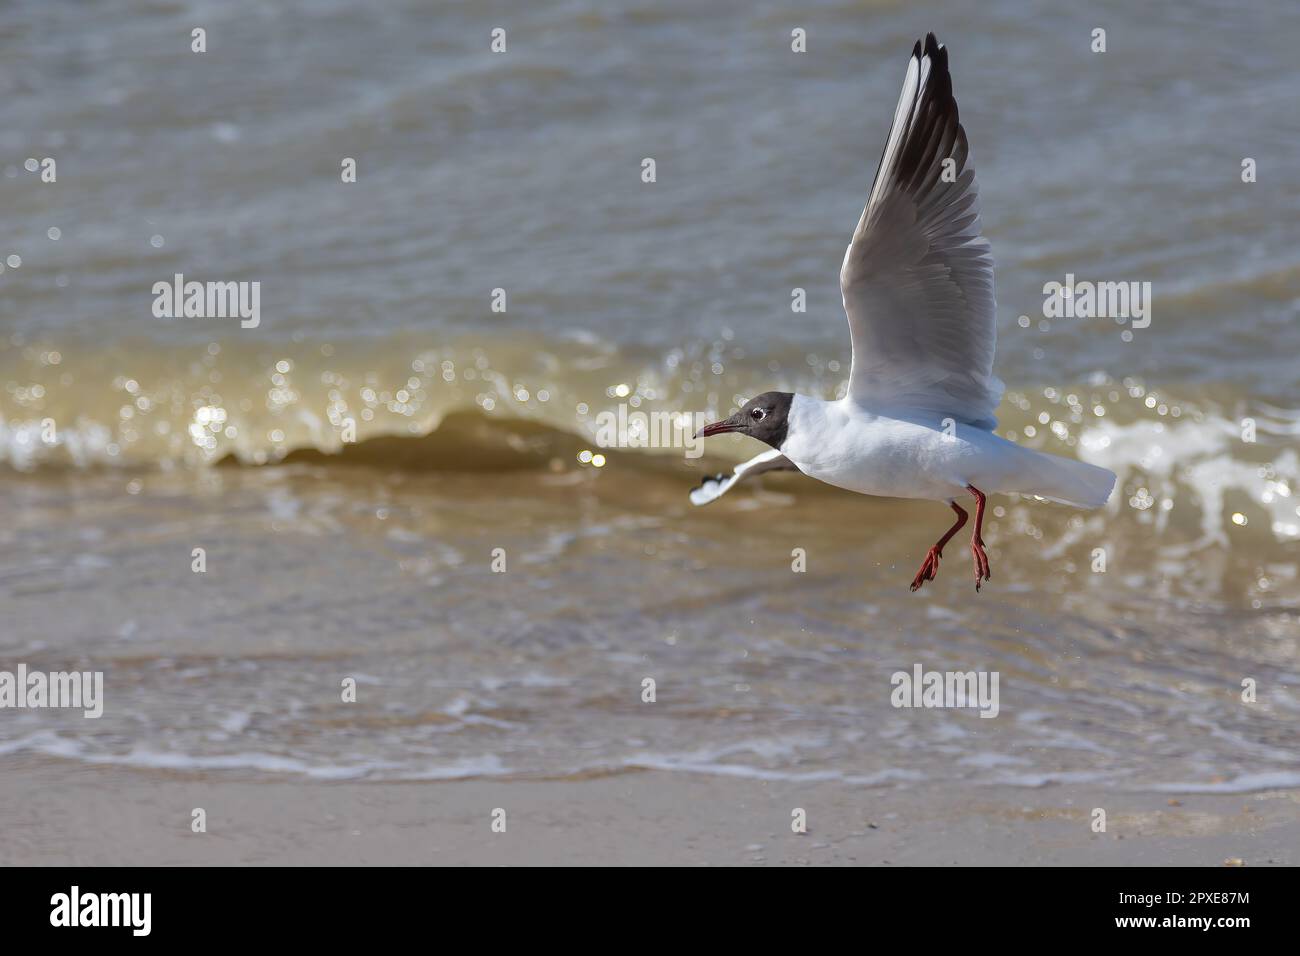 A seagull (larum) flies close to the sand of a beach with the waterline of the North sea in background Stock Photo